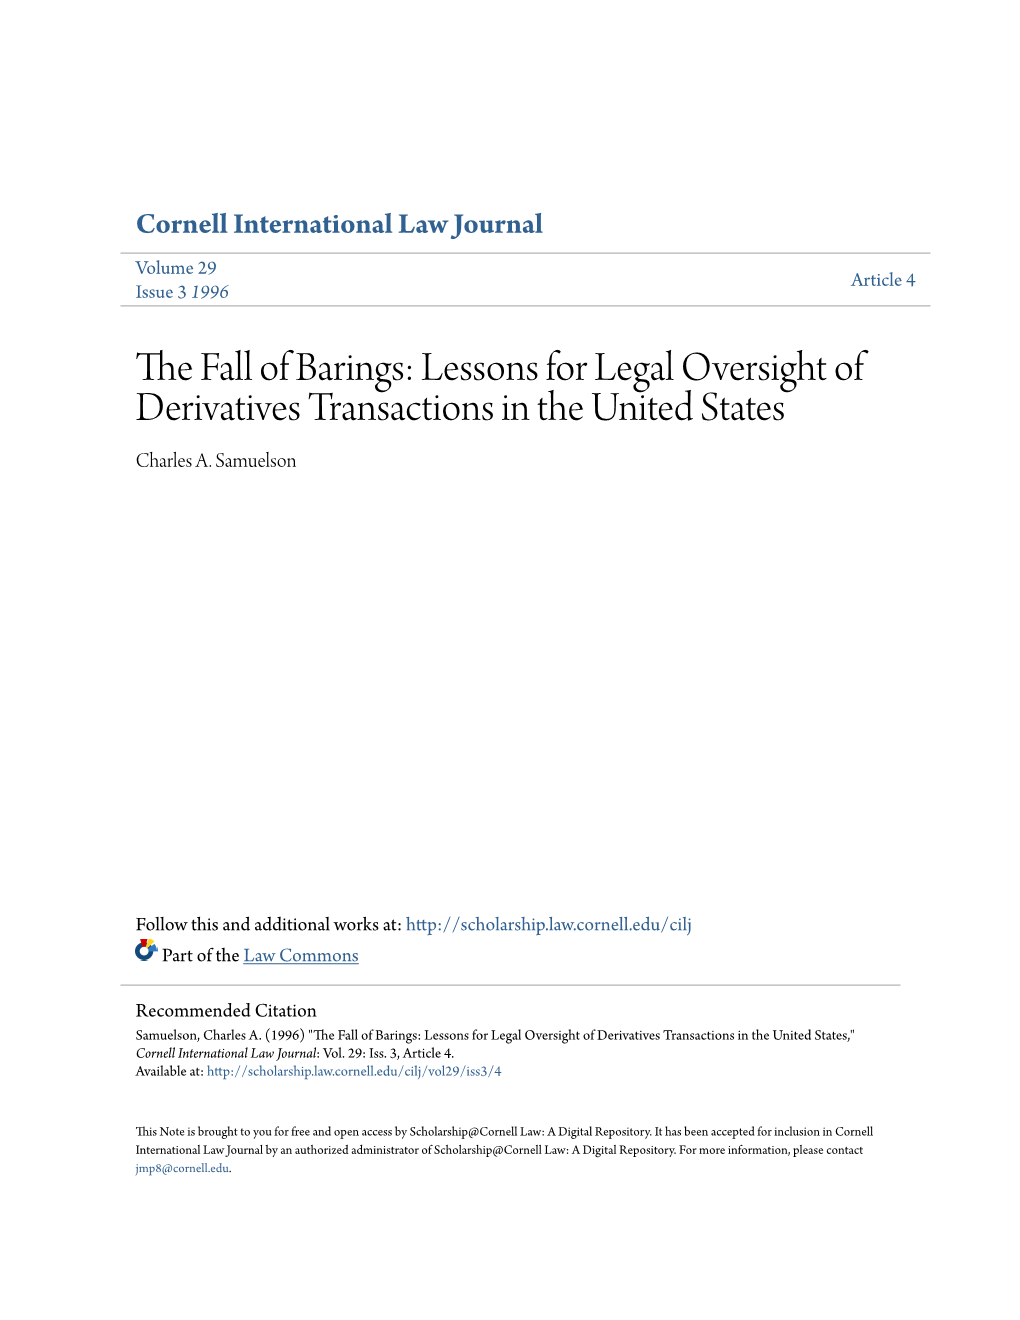 The Fall of Barings: Lessons for Legal Oversight of Derivatives Transactions in the United States Charles A